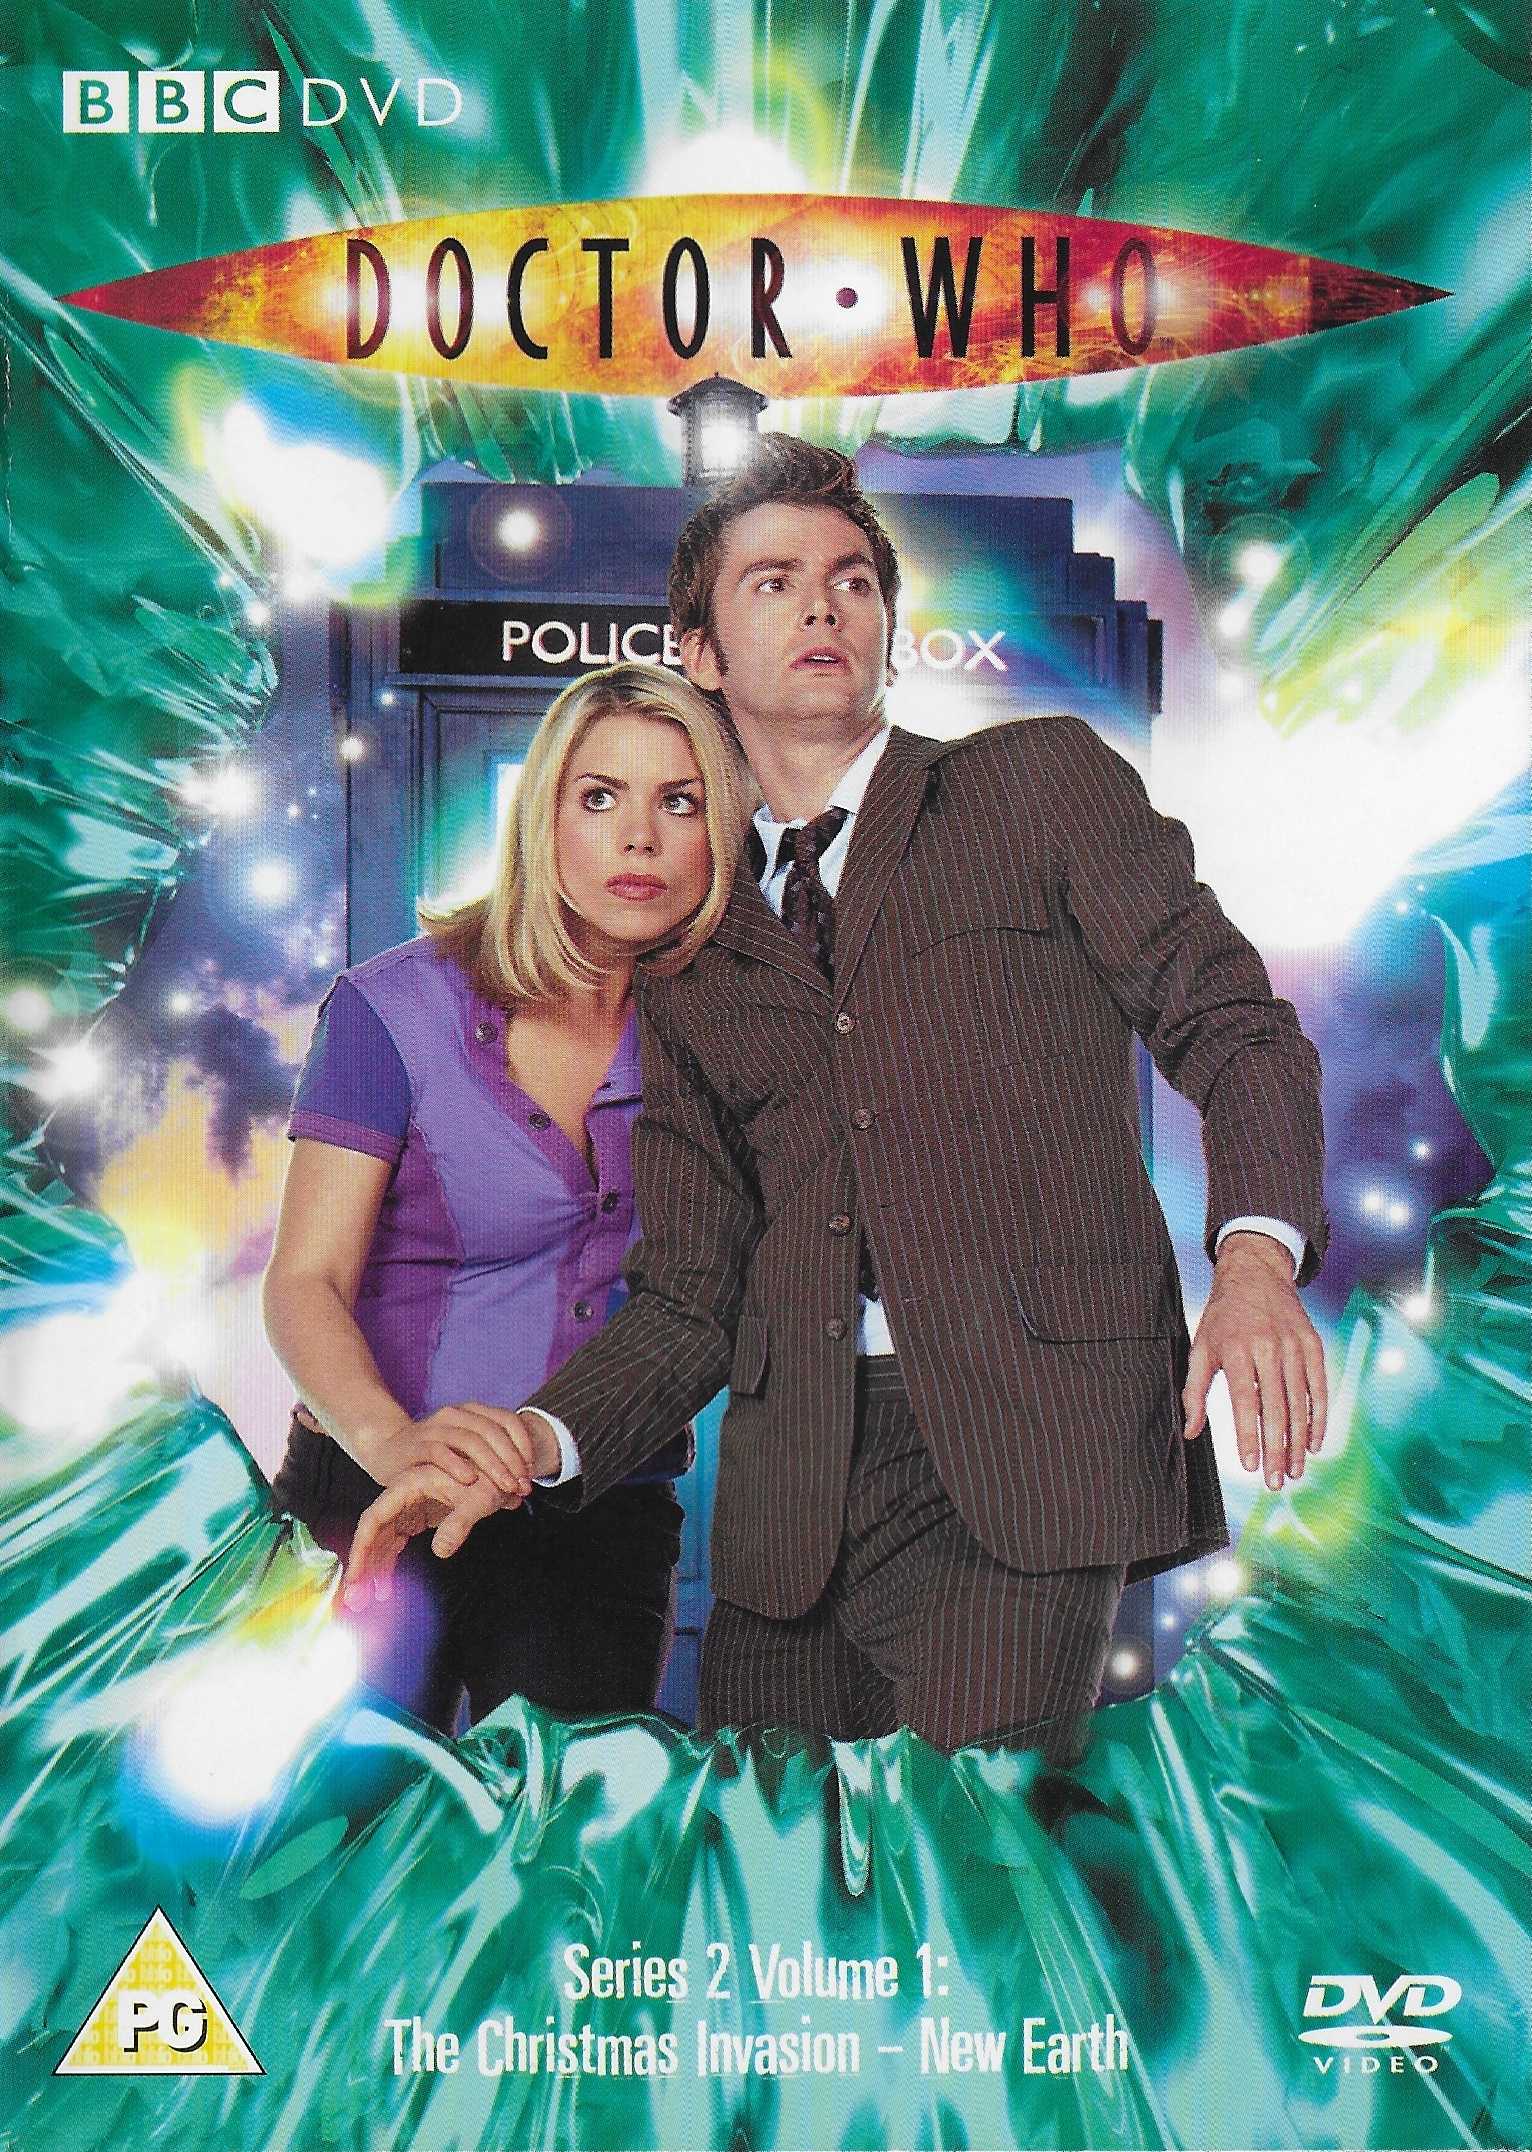 Picture of BBCDVD 1960 Doctor Who - Series 2, volume 1 by artist Russell T Davies from the BBC records and Tapes library